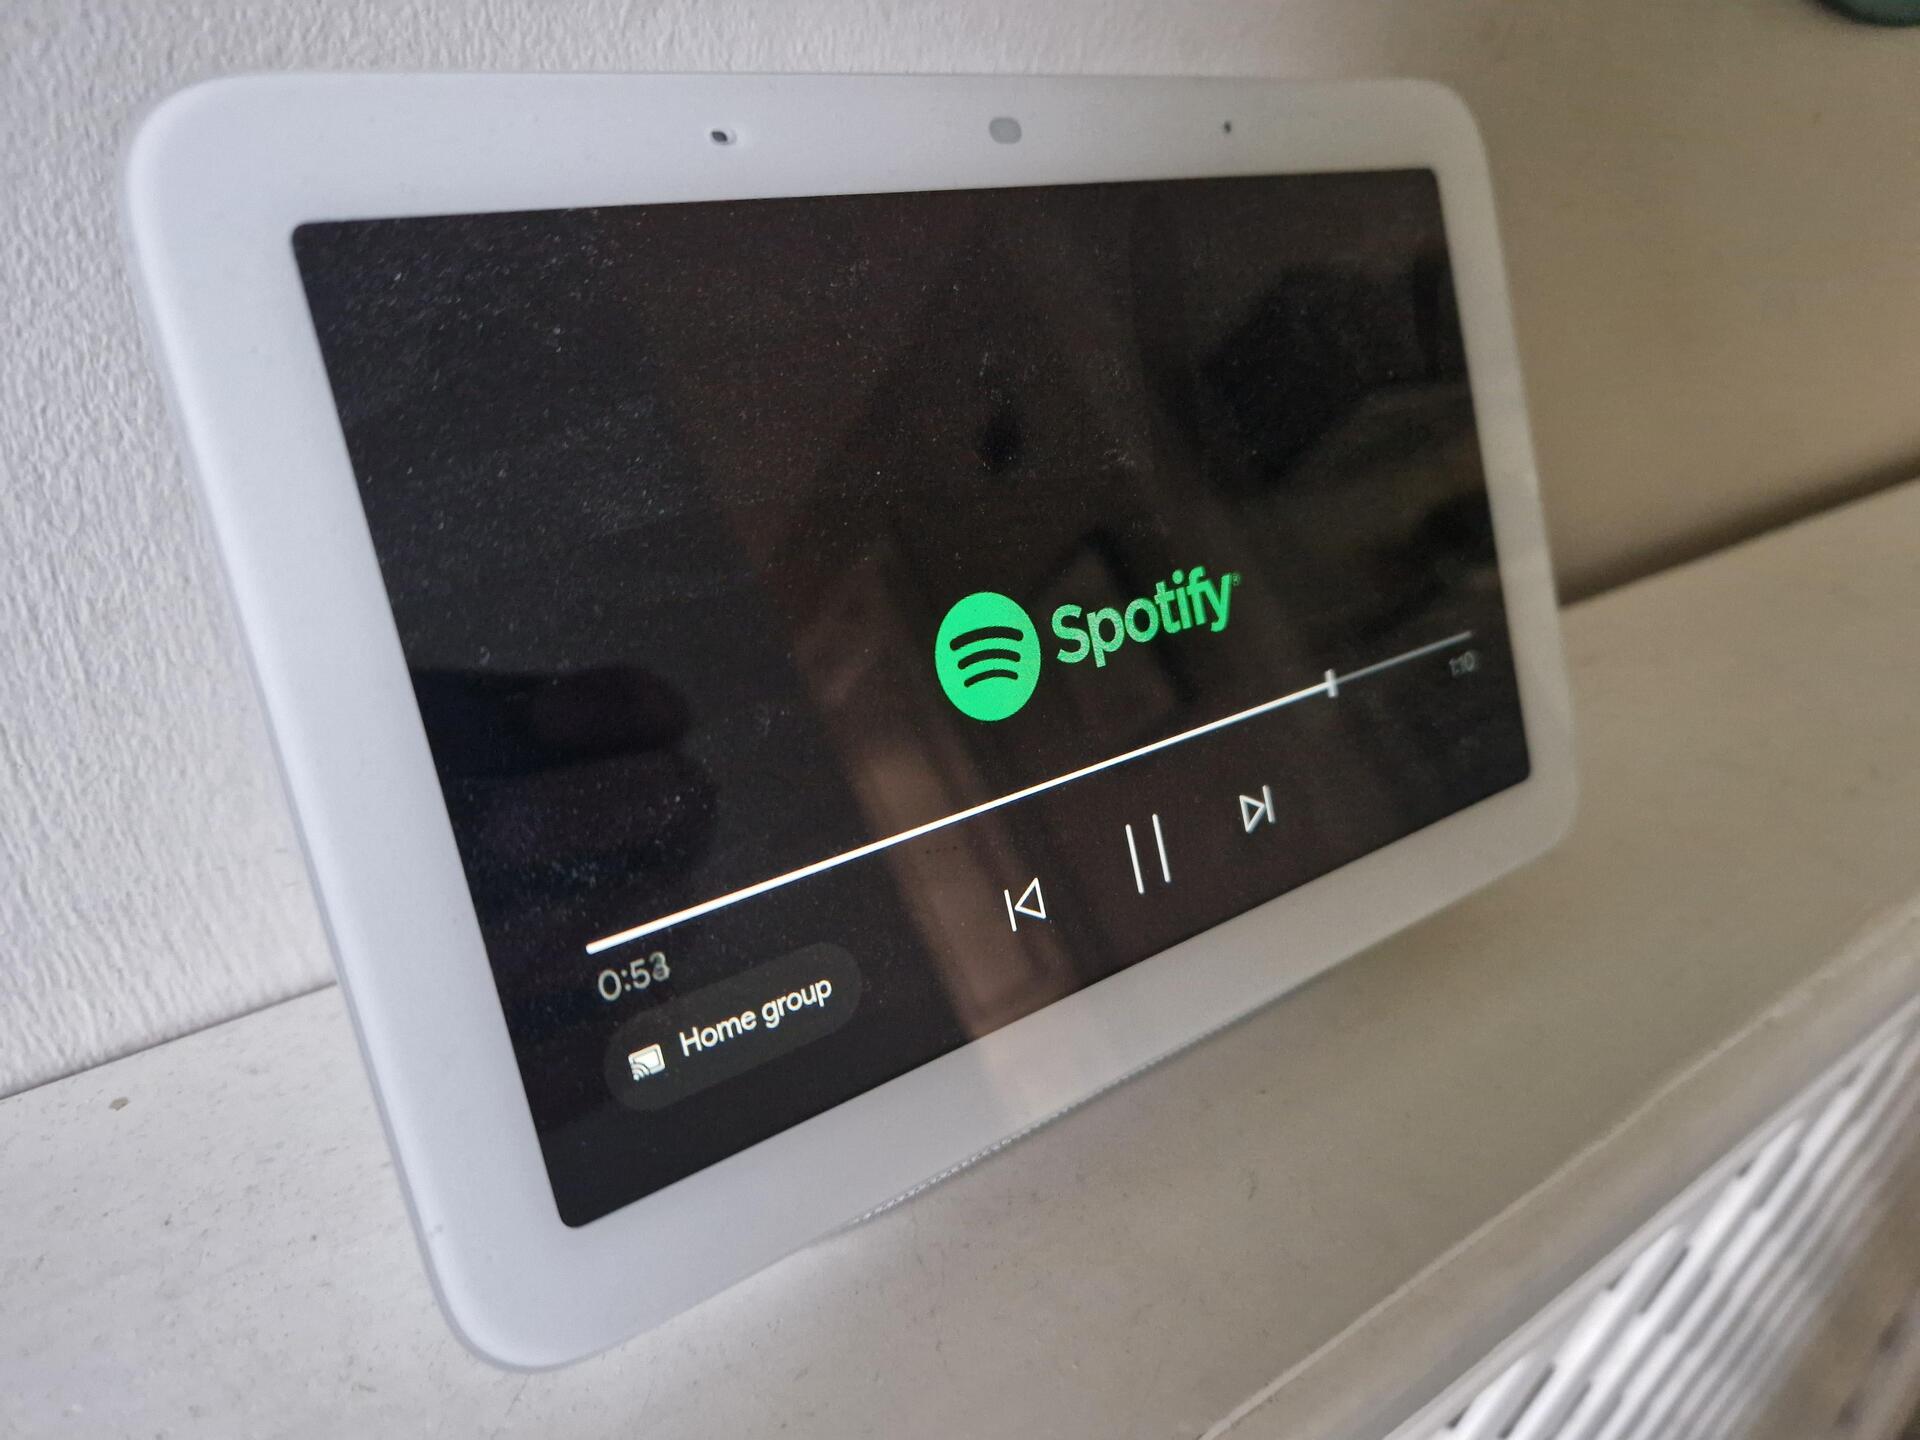 Why Won't Spotify Connect To My Google Home?